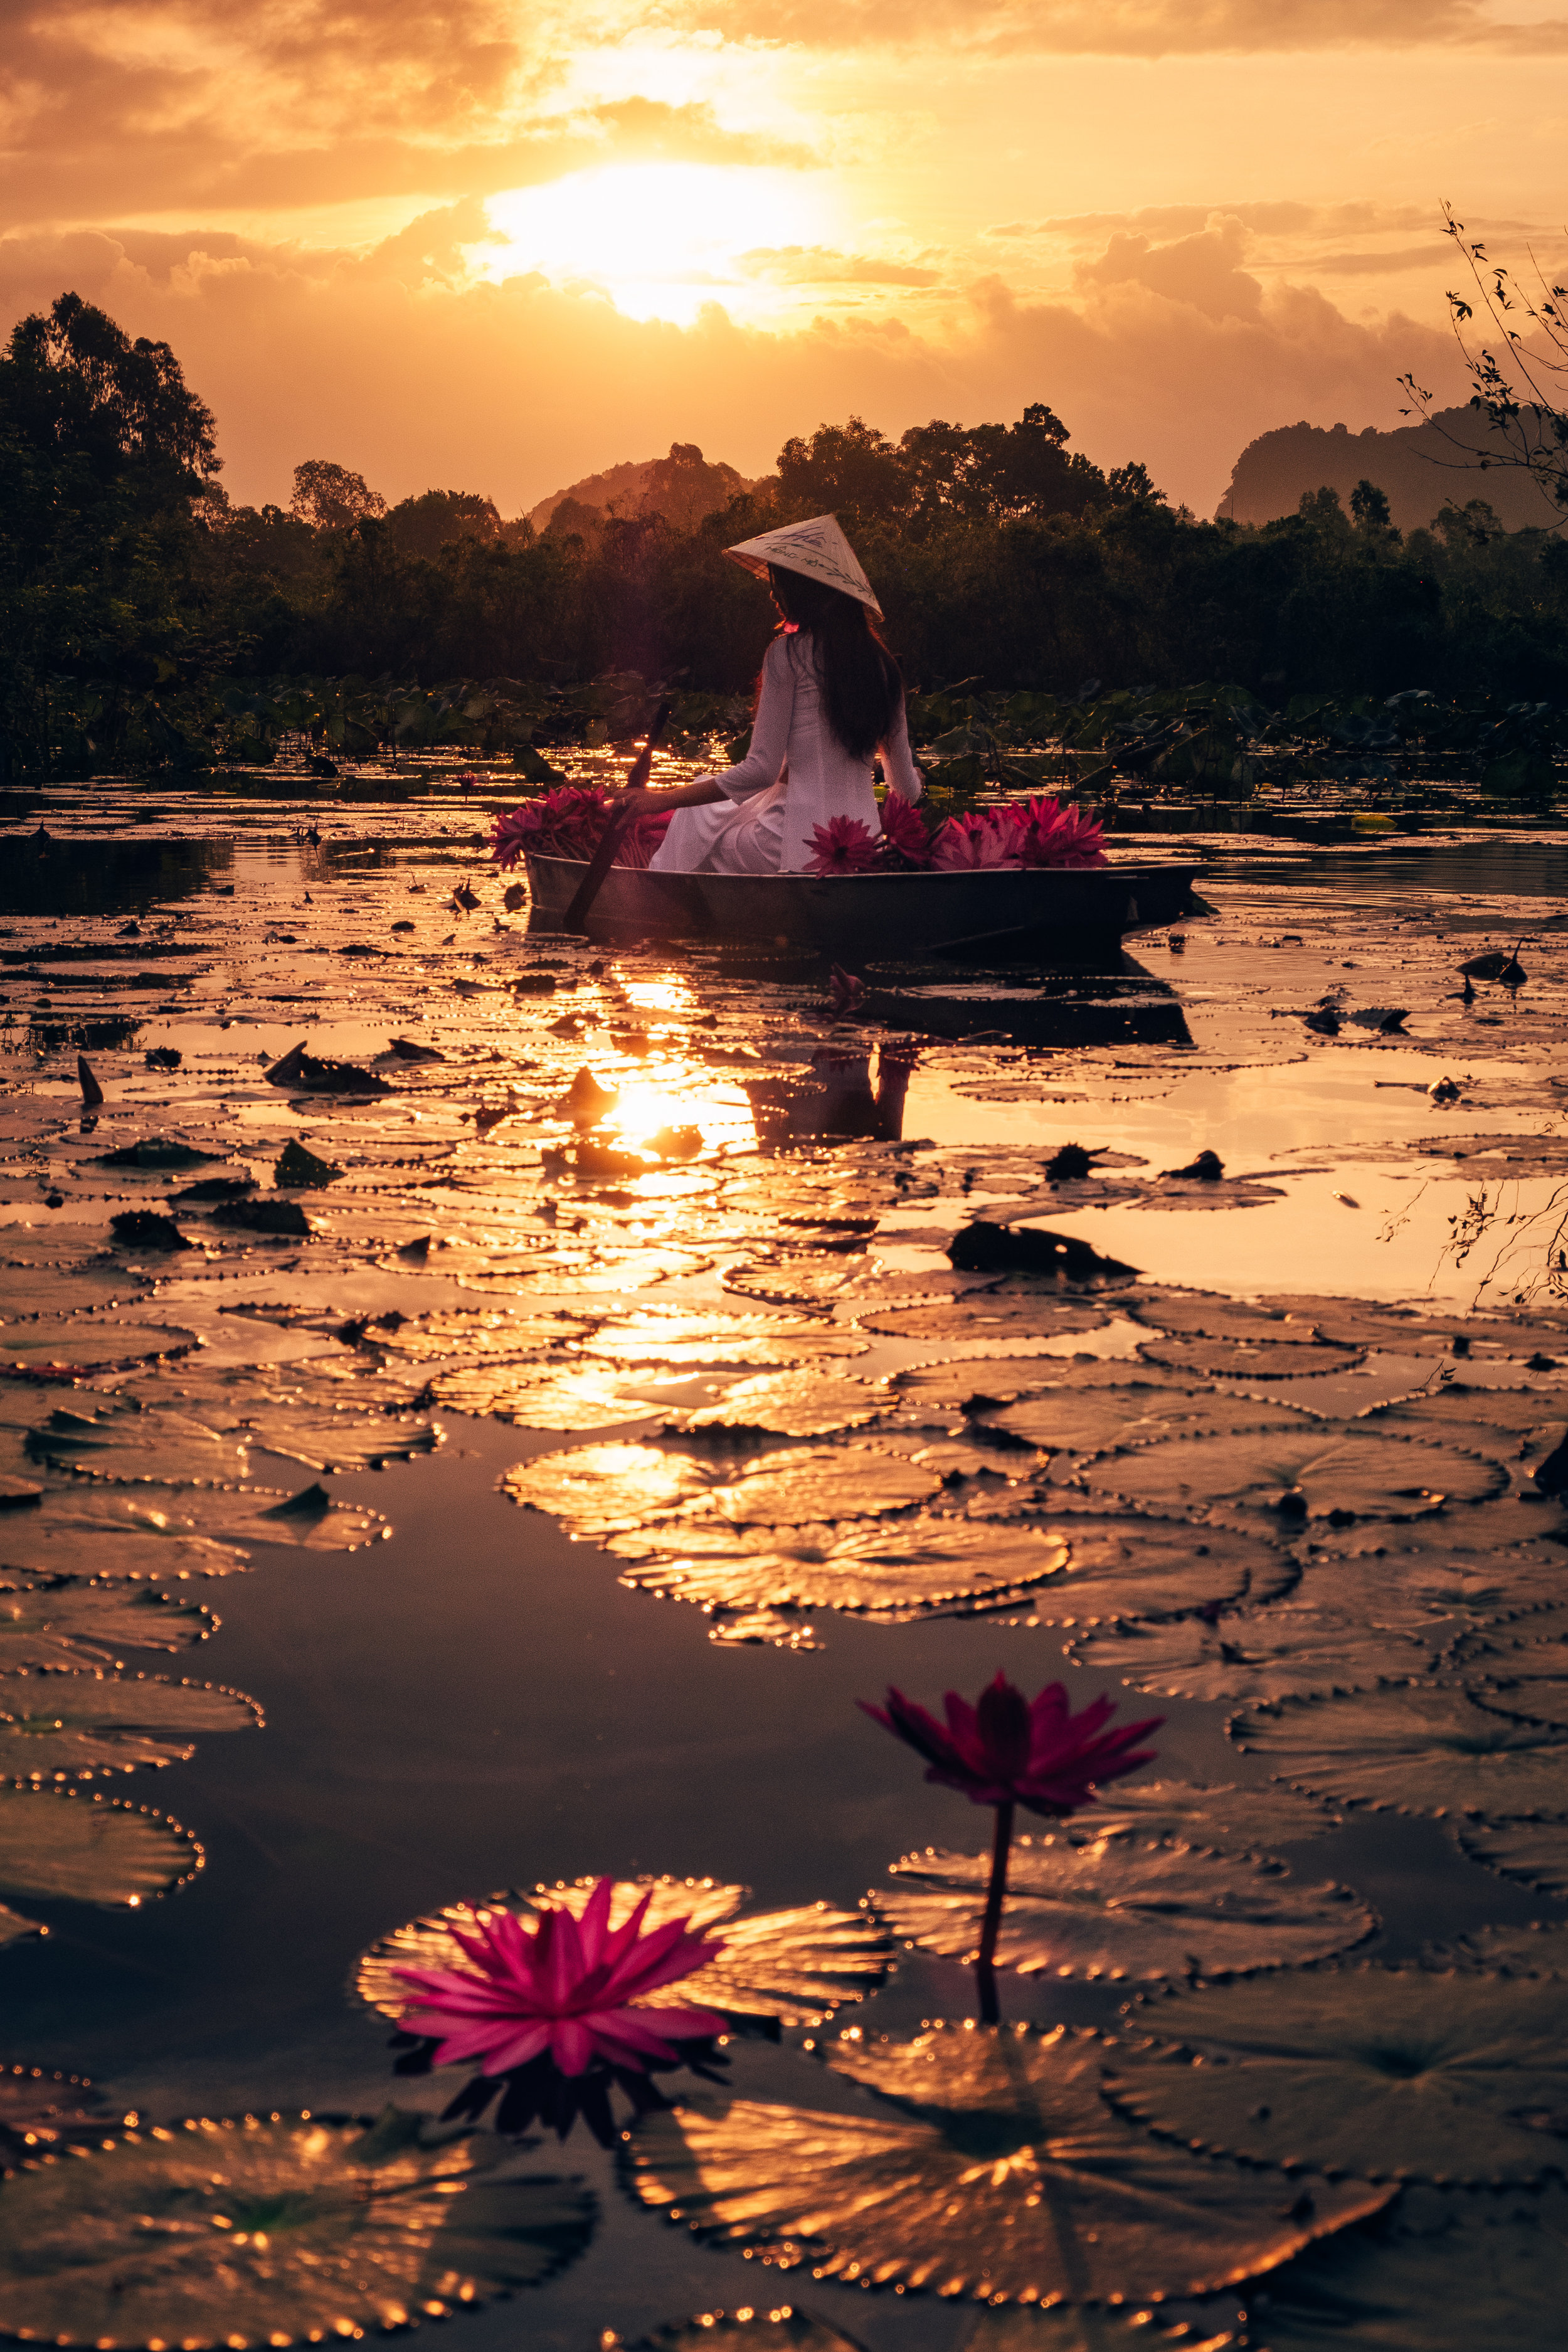 A boat riding during beautiful sunrise in perfume pagoda in viet